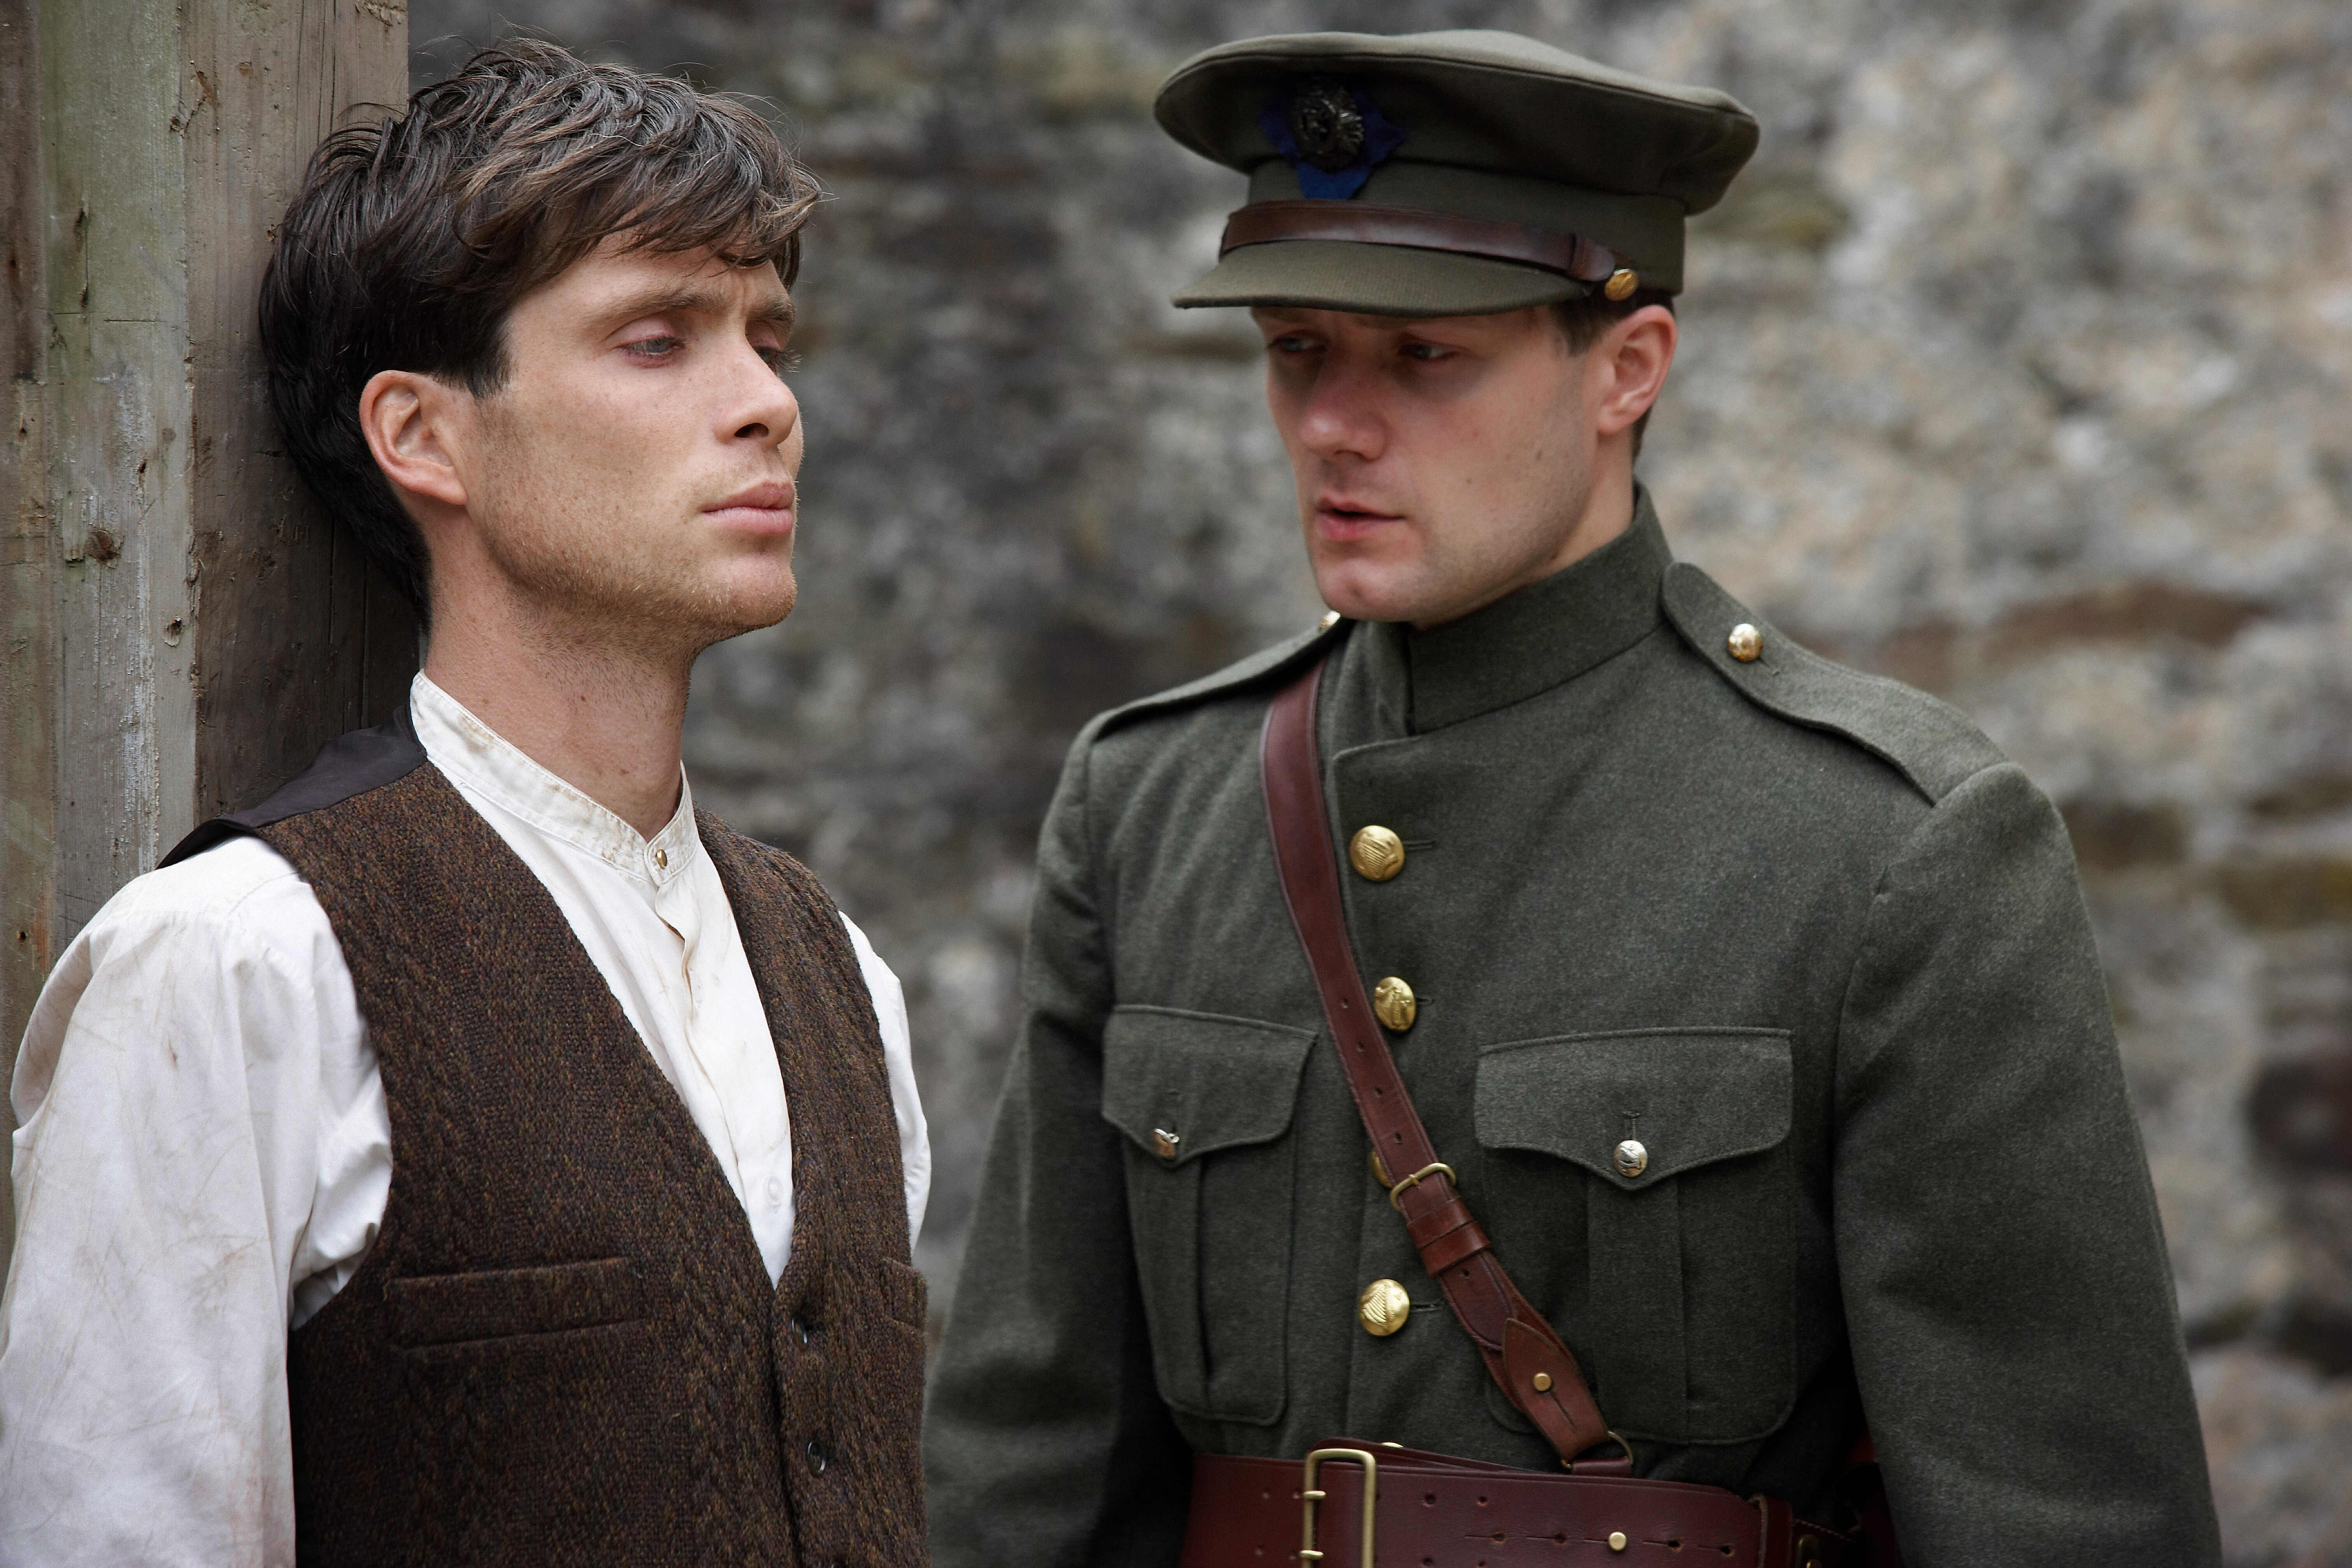 Still of Cillian Murphy and Pádraic Delaney in The Wind That Shakes The Barley (2006)